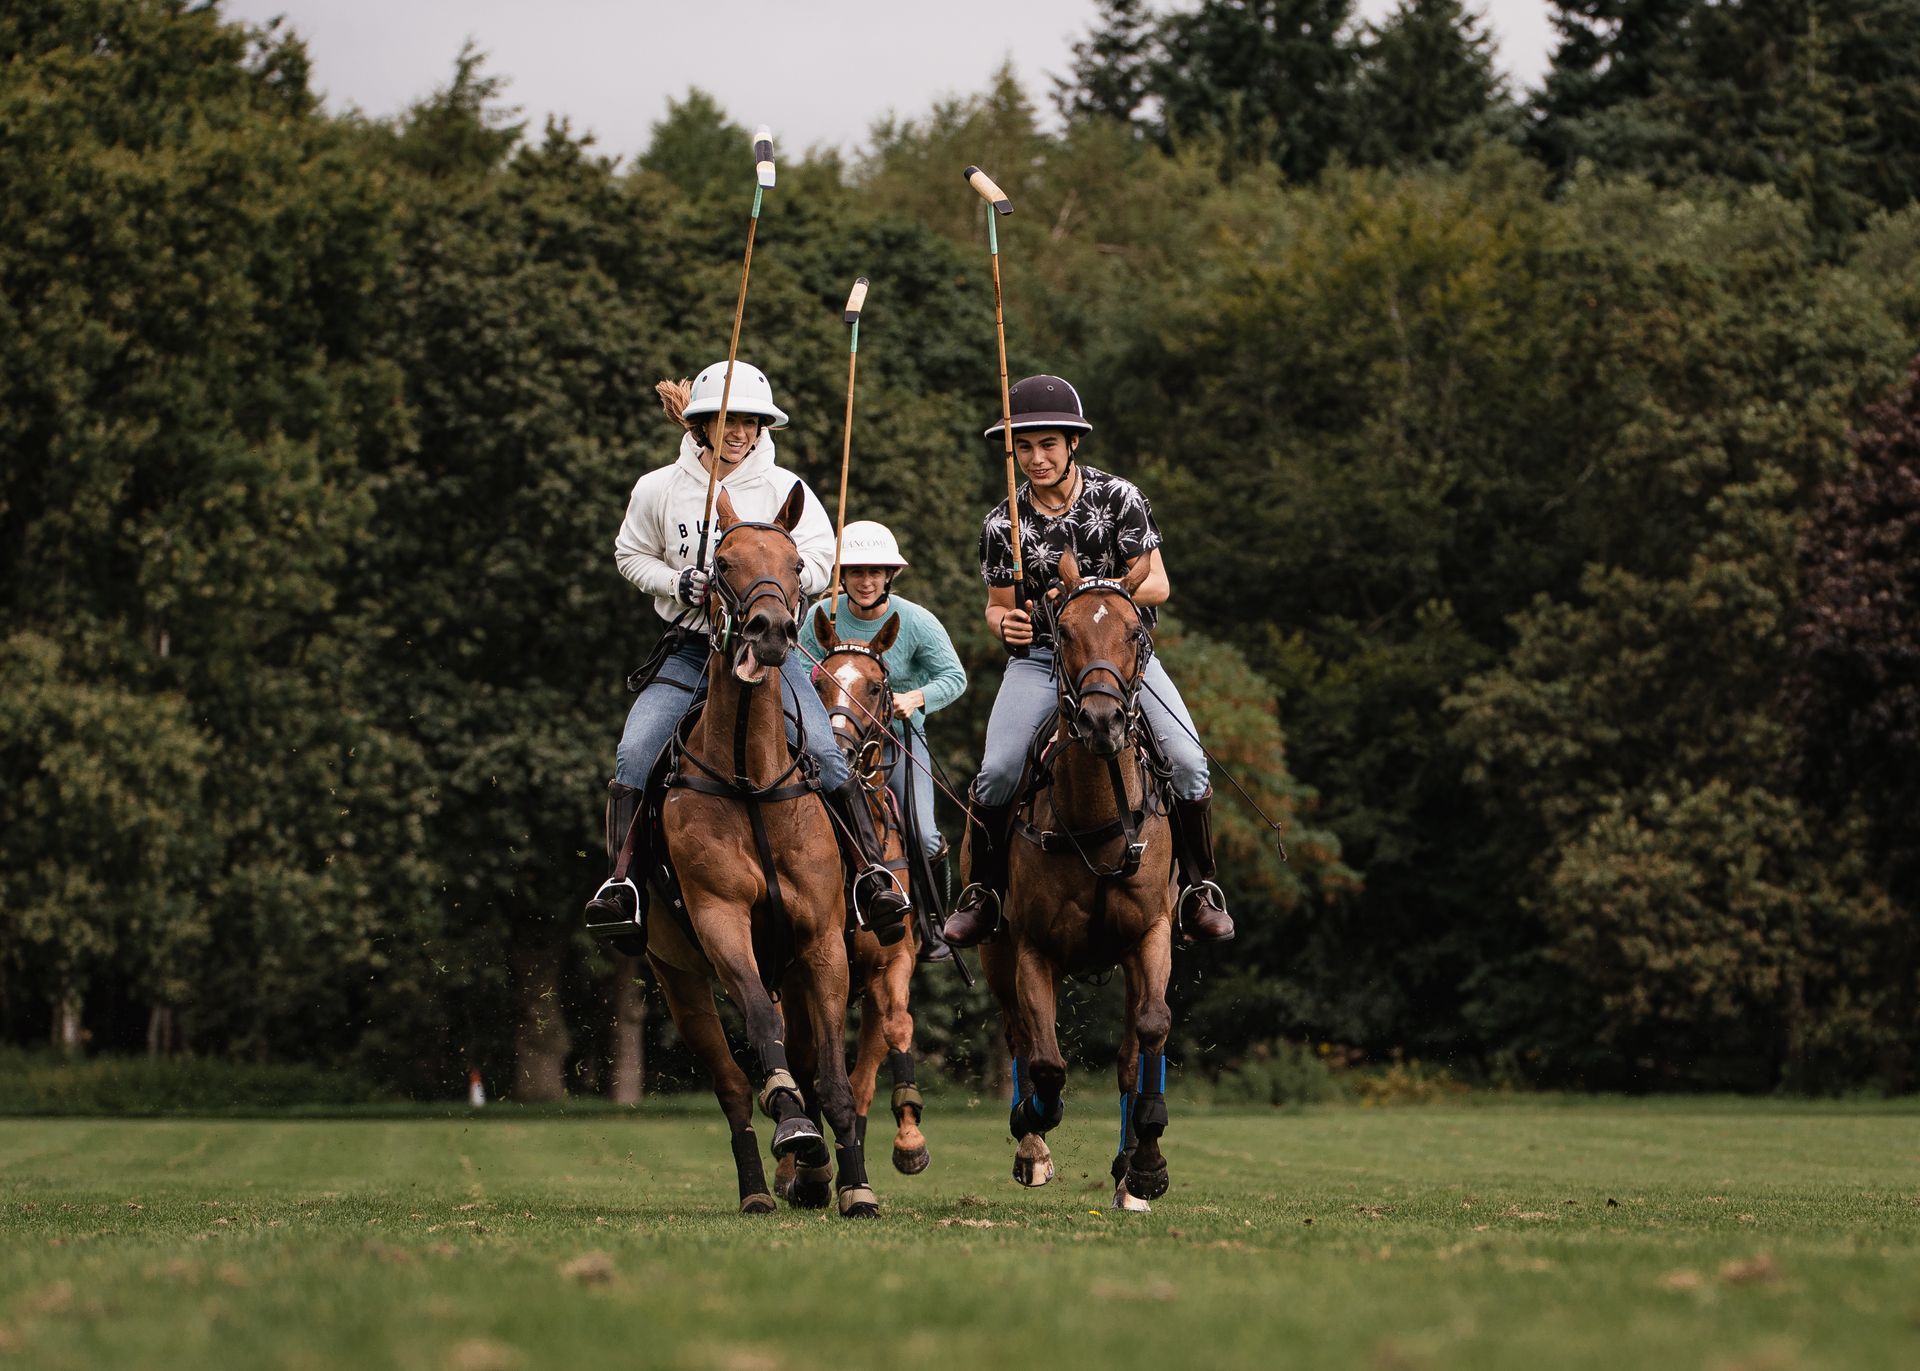 a group of people are riding horses on a field .